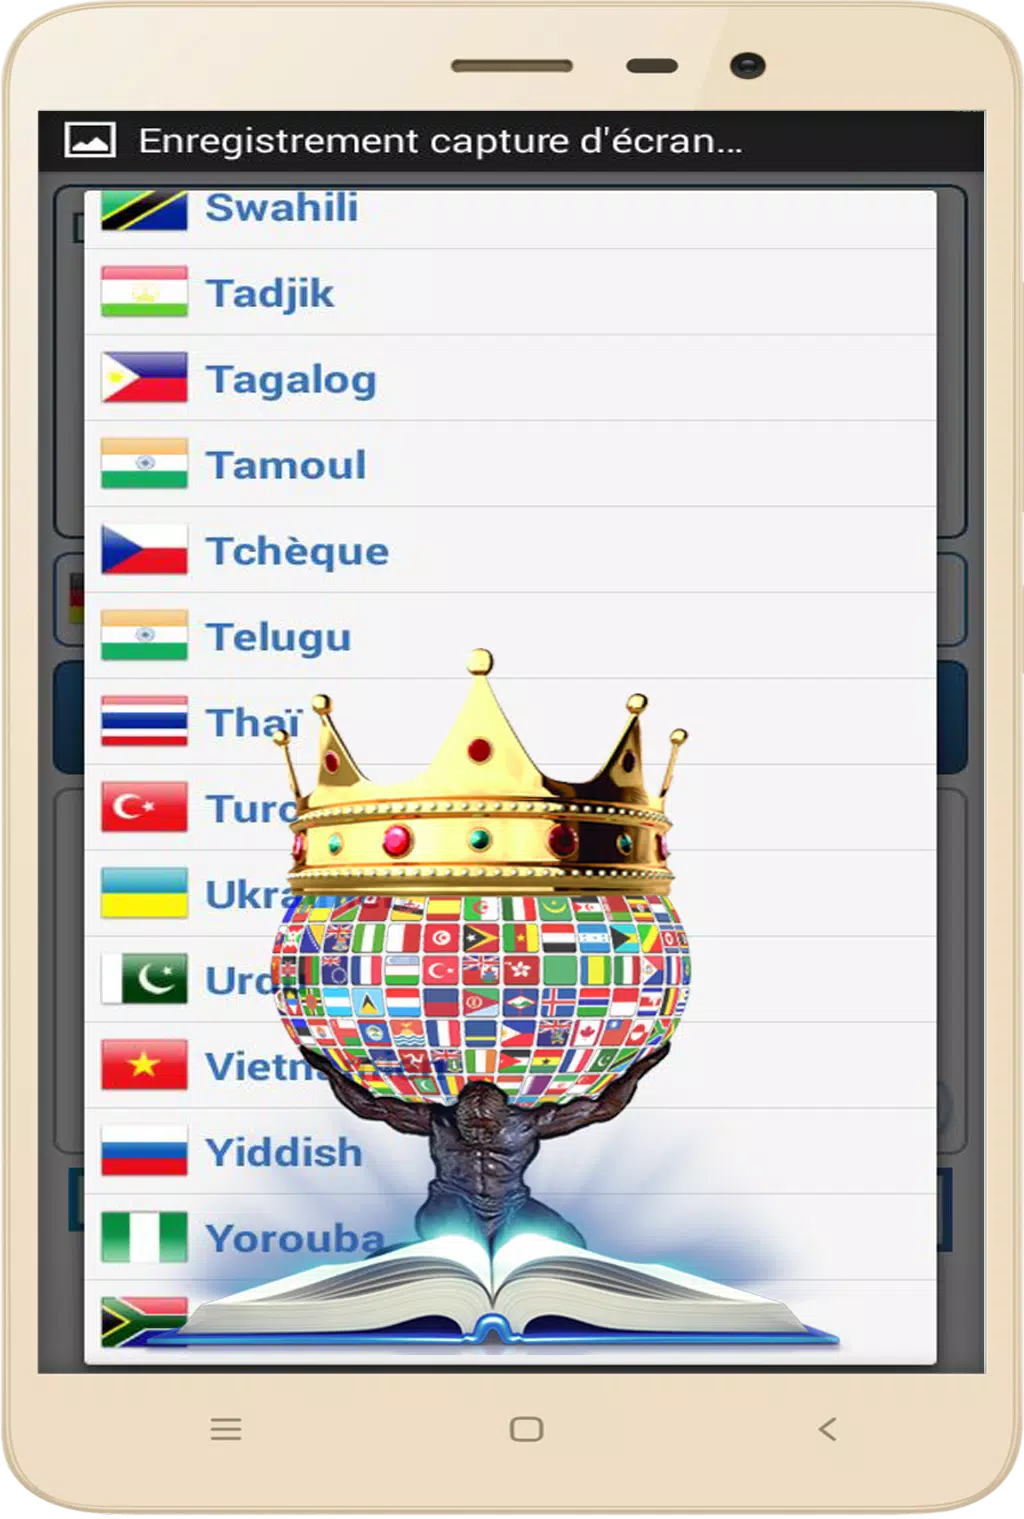 Who is the king of all languages?